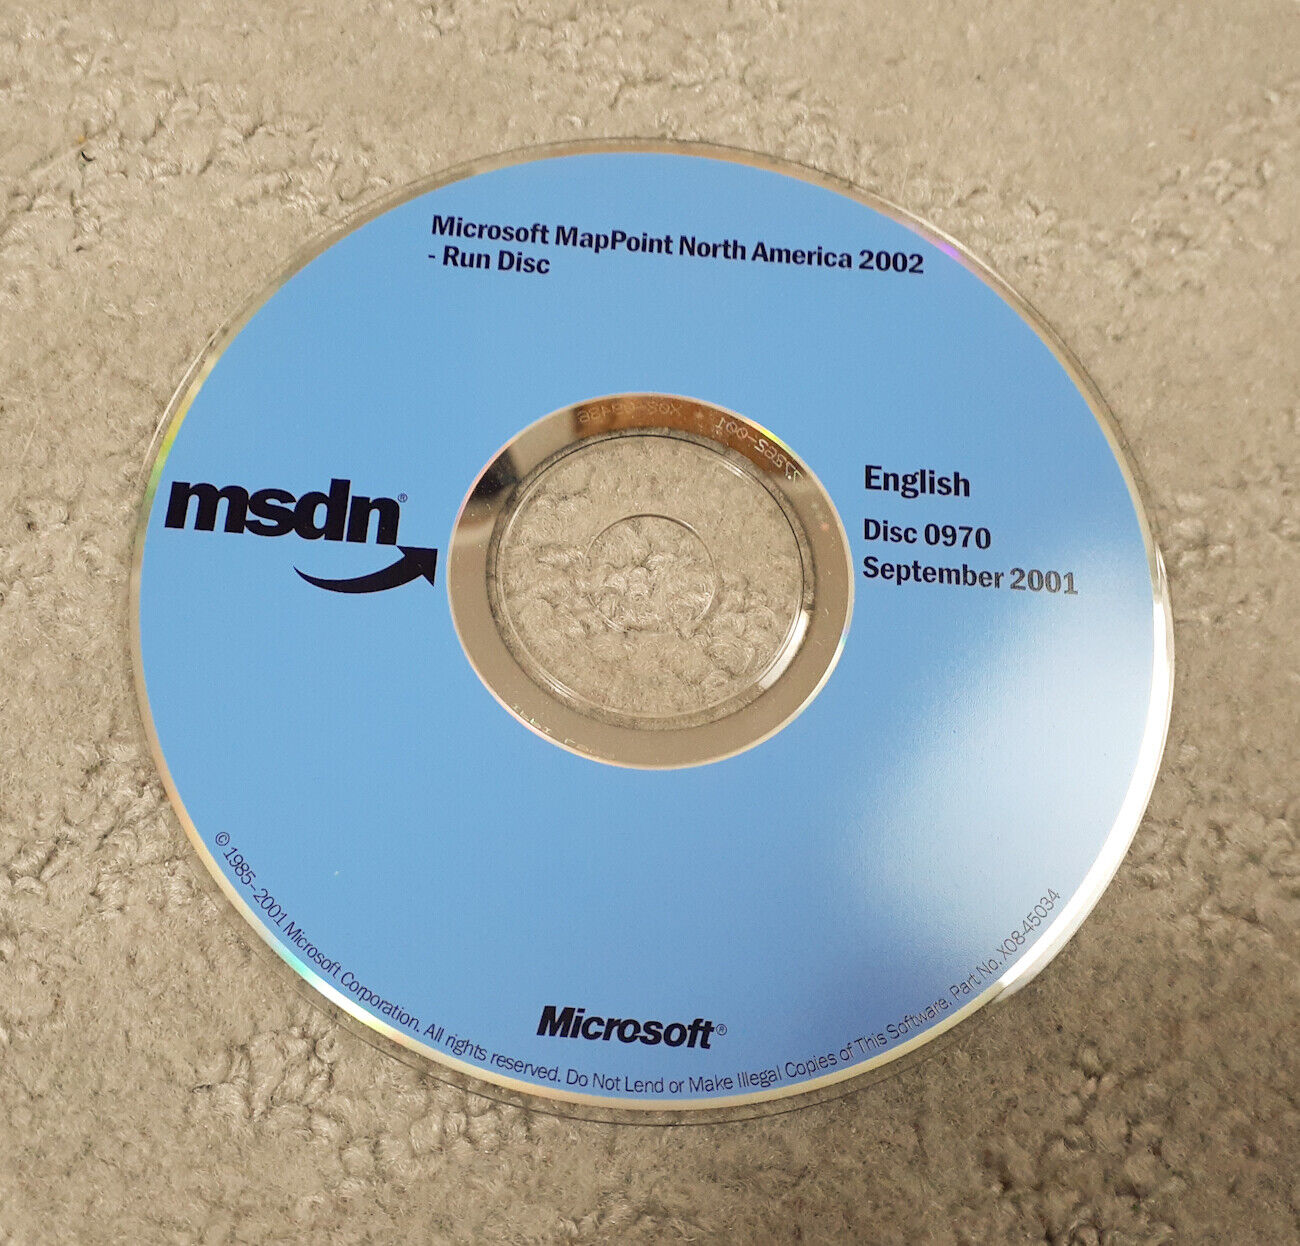 MSDN Disc 0970 September 2001 Microsoft MapPoint North America 2002 Run Disc